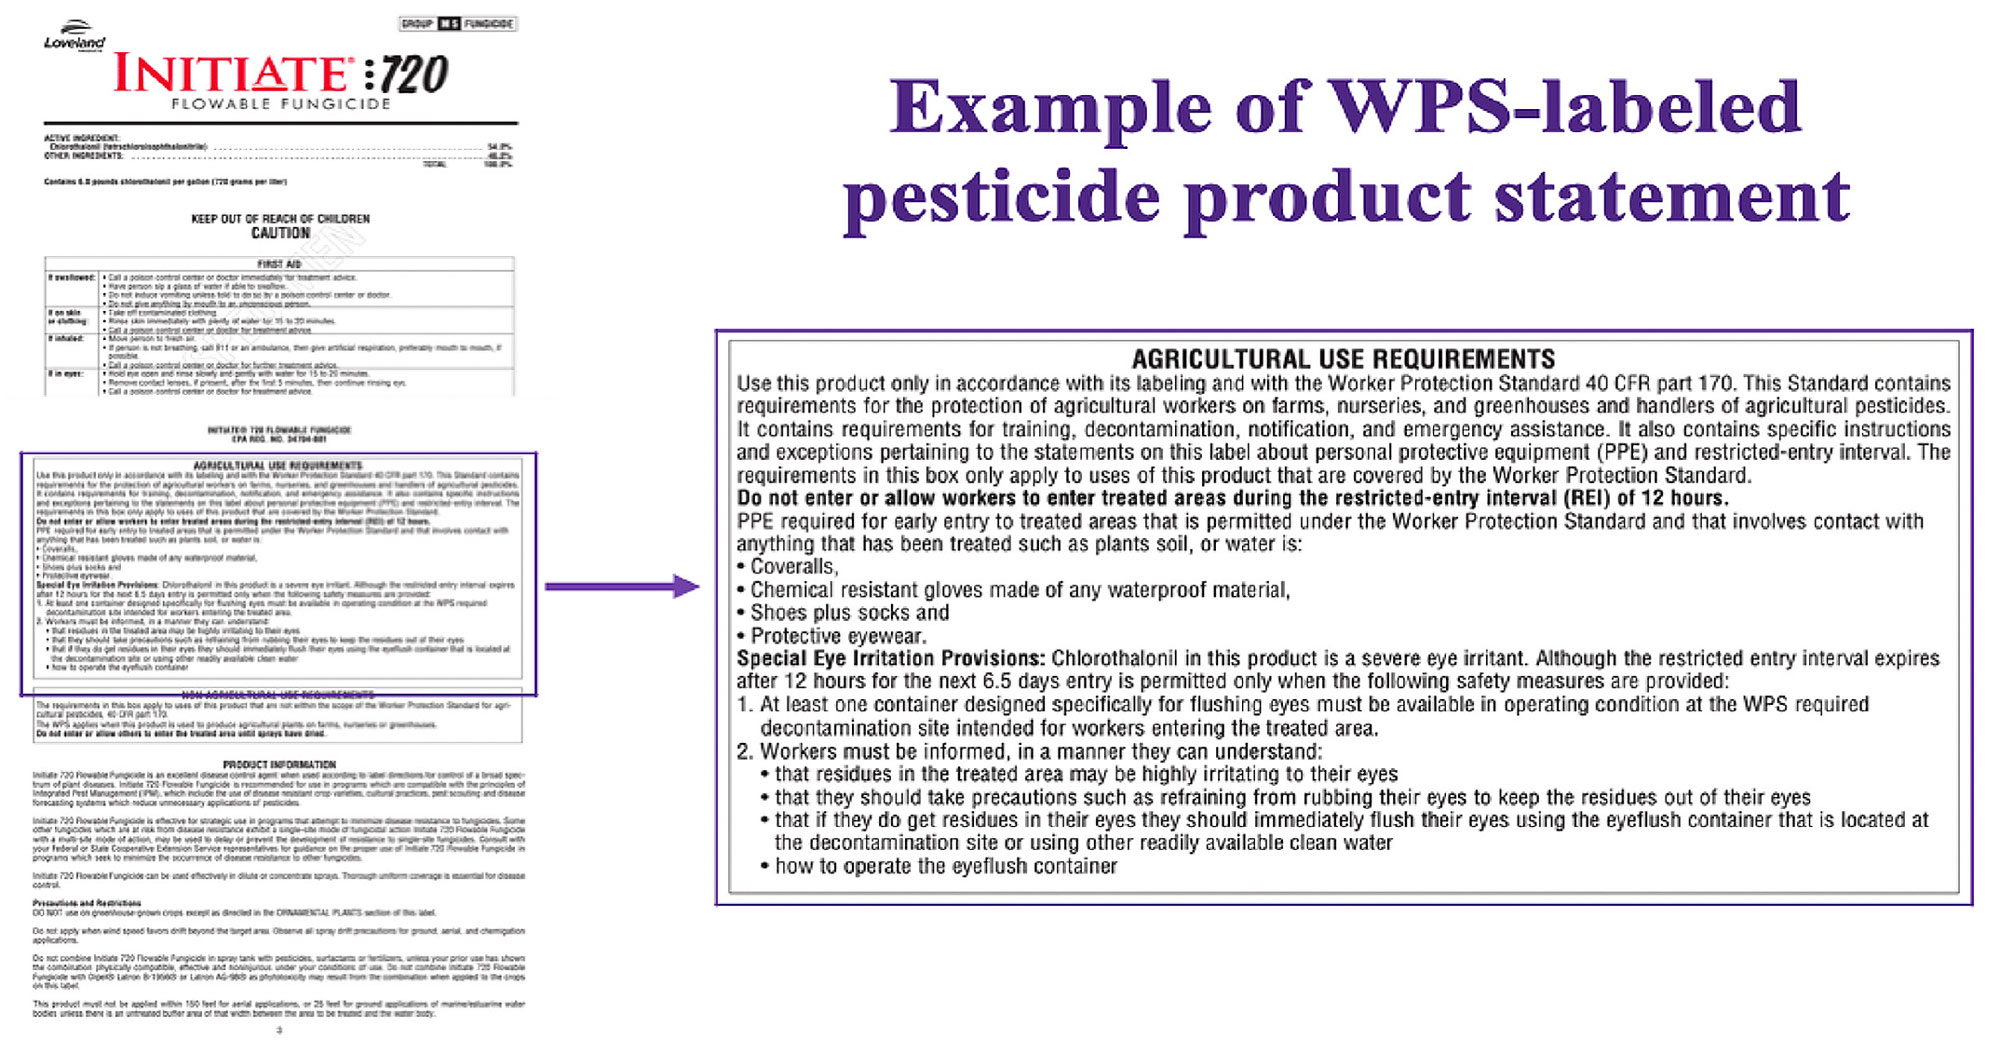 pesticide label with zoomed in section